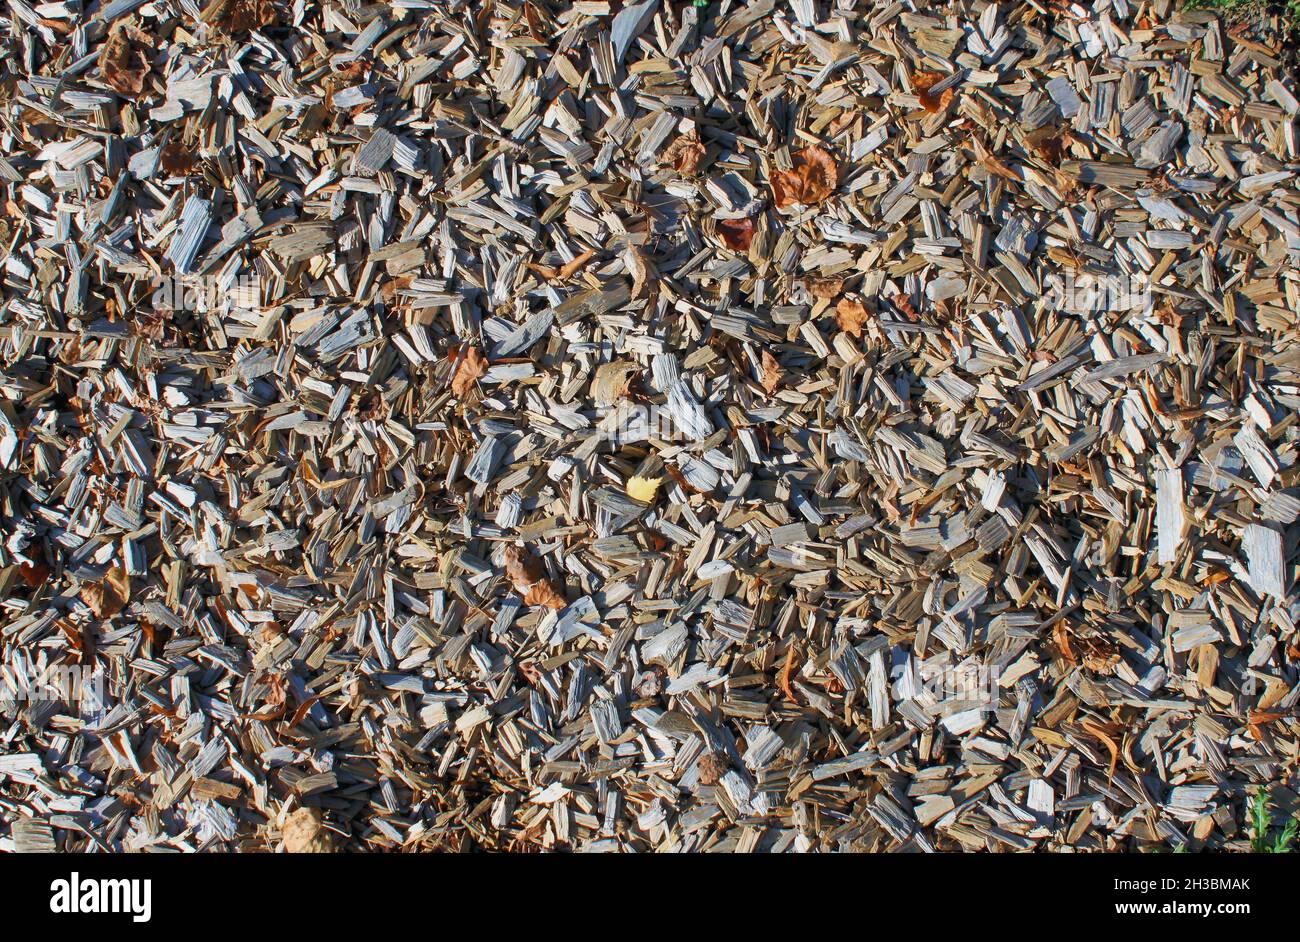 a pile of wood chips unsorted outside on a playground Stock Photo